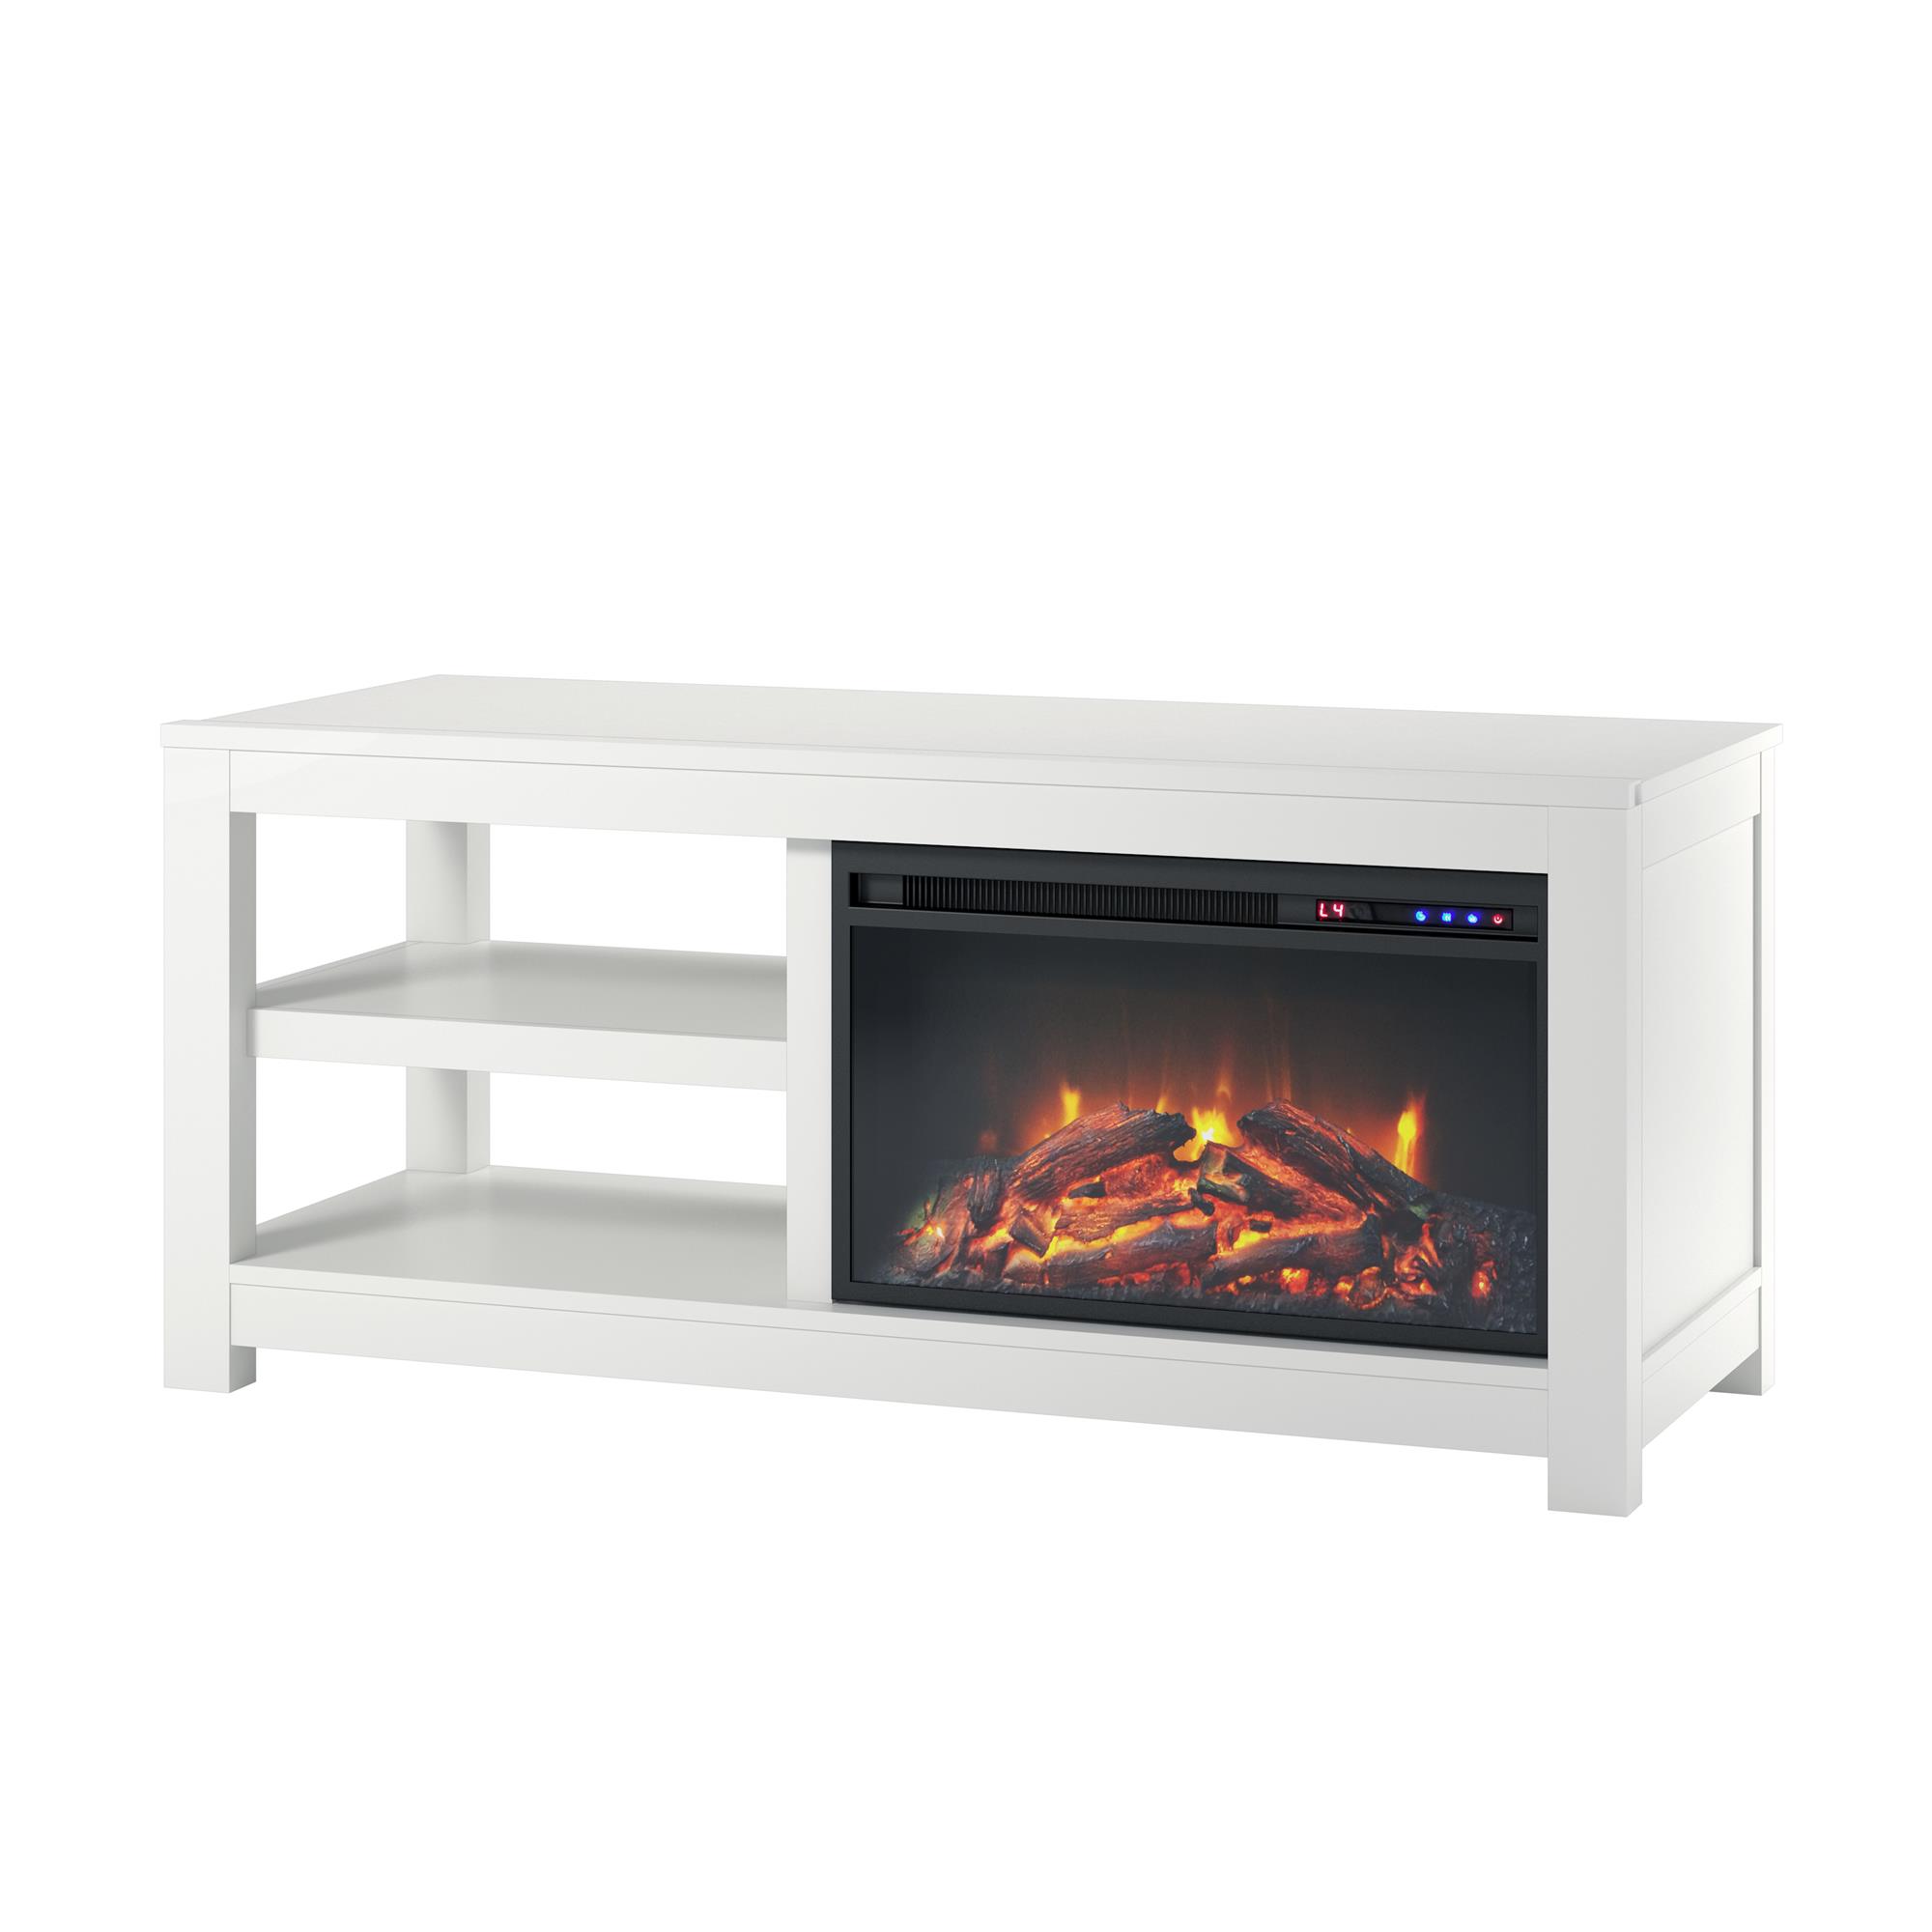 Ameriwood Home Glyndon Electric Fireplace TV Stand for TVs up to 55" White - image 4 of 7